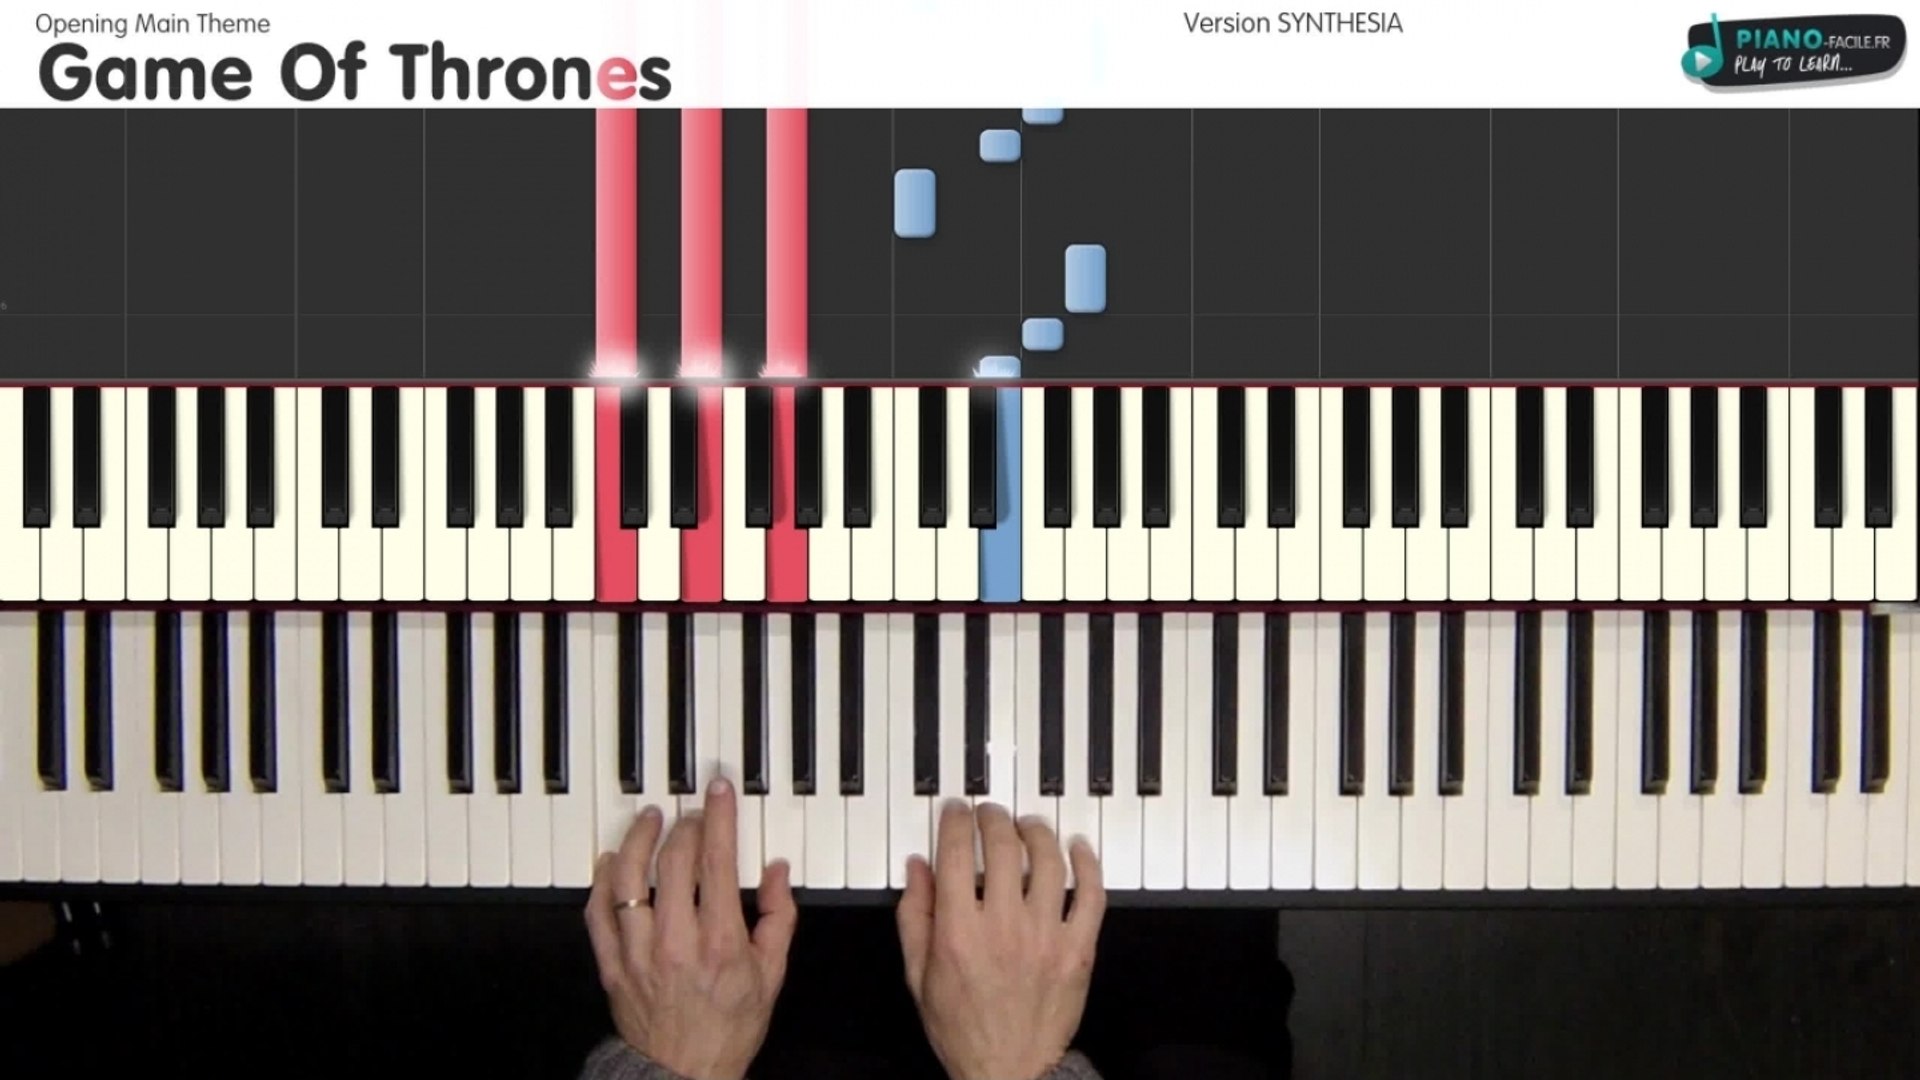 Game Of Thrones -Opening Main Theme -[Tutorial Piano] (synthesia) - S -  Vidéo Dailymotion